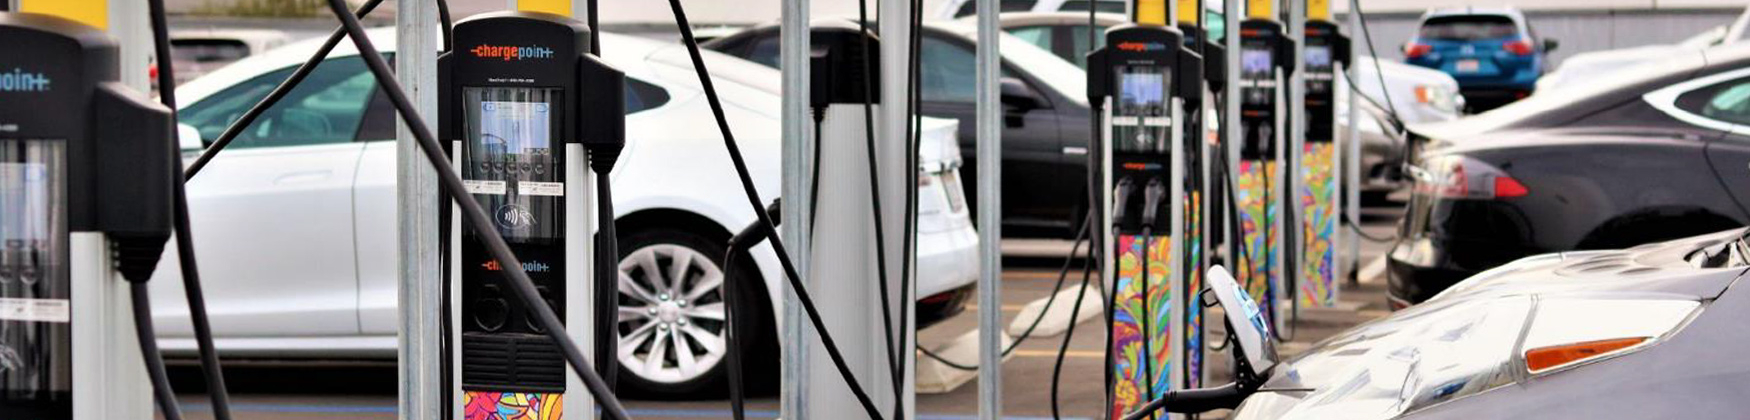 electric-vehicle-rebates-and-infrastructure-cse